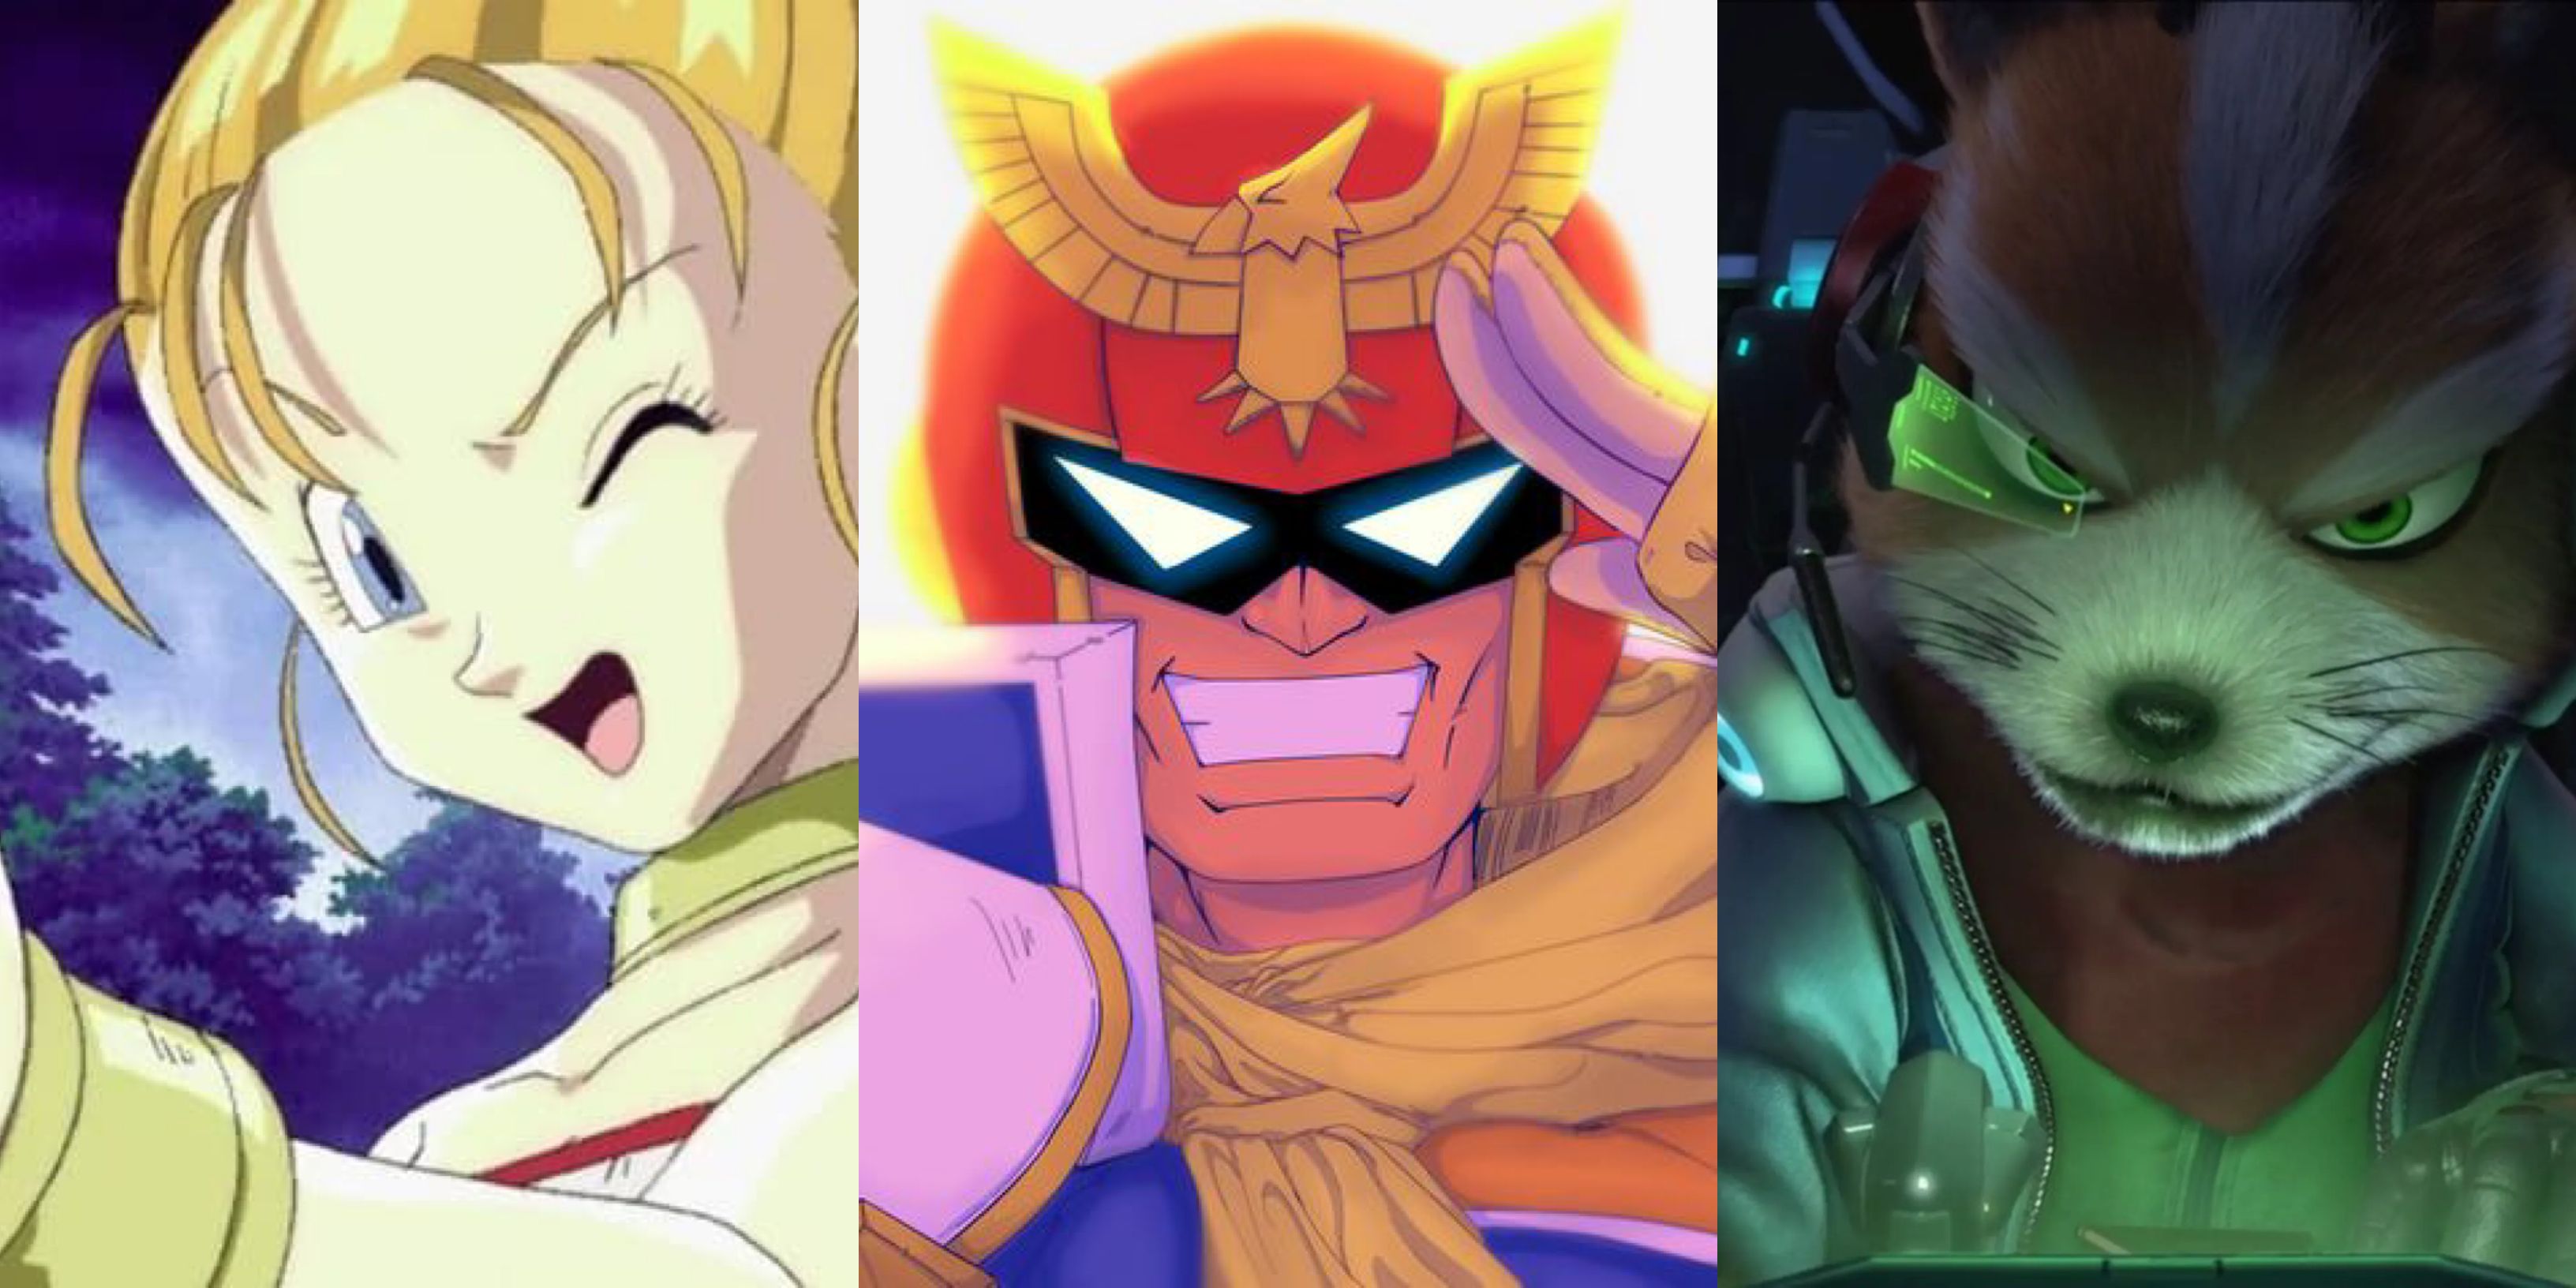 Great Characters That Debuted On The SNES: Merle from Chrono Trigger (left), Captain Falcon from F-Zero (middle), and Fox McCloud from Star Fox (right)